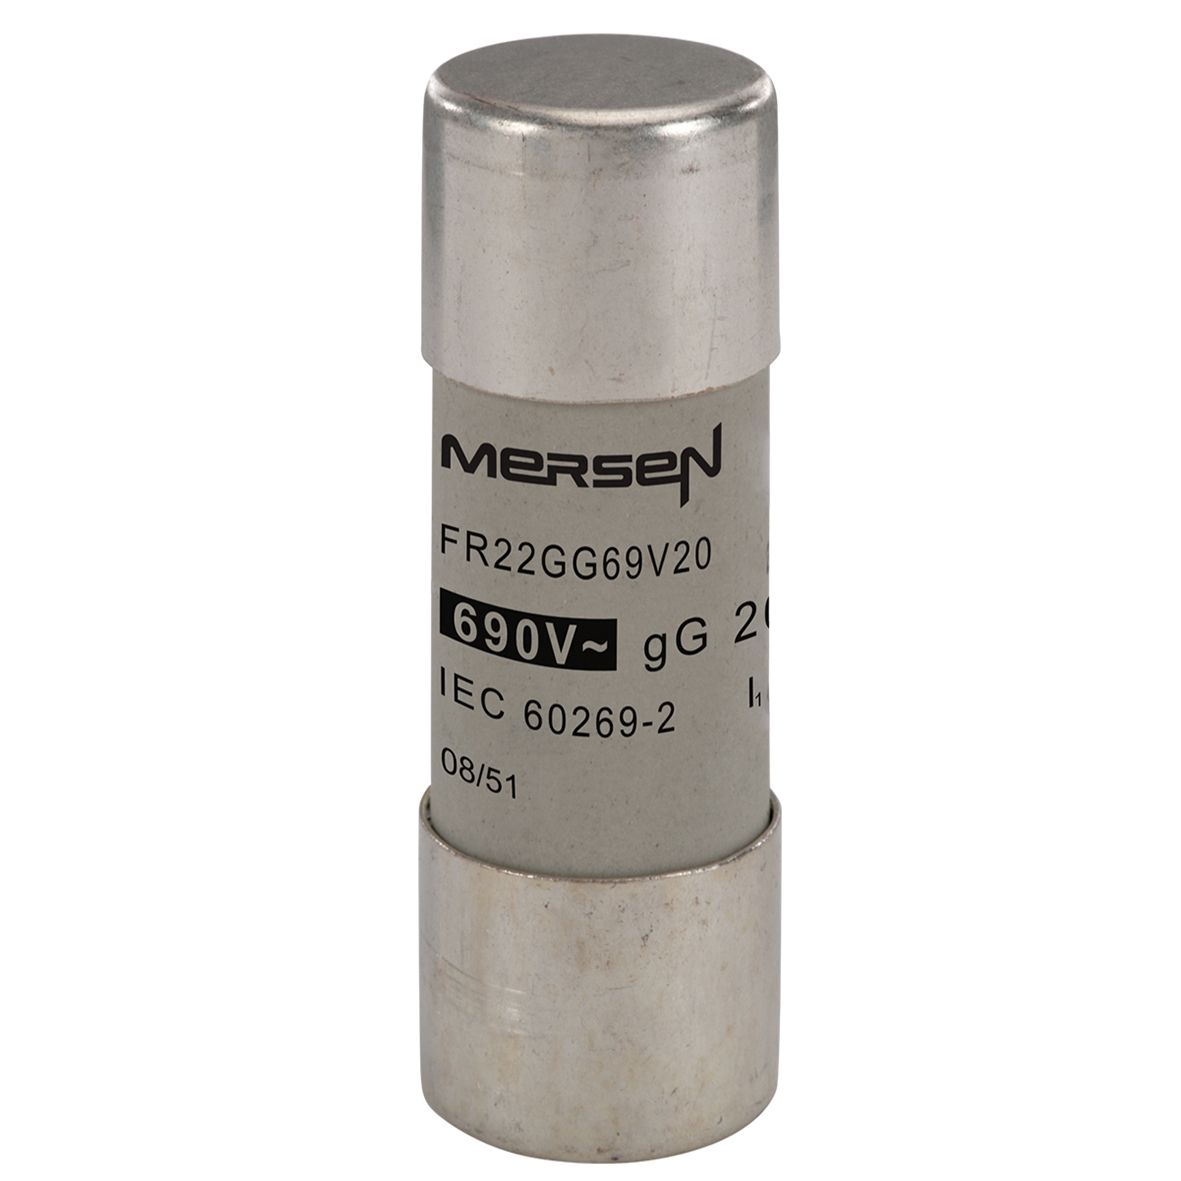 P211038 - Cylindrical fuse-link gG 690VAC 22.2x58, 20A